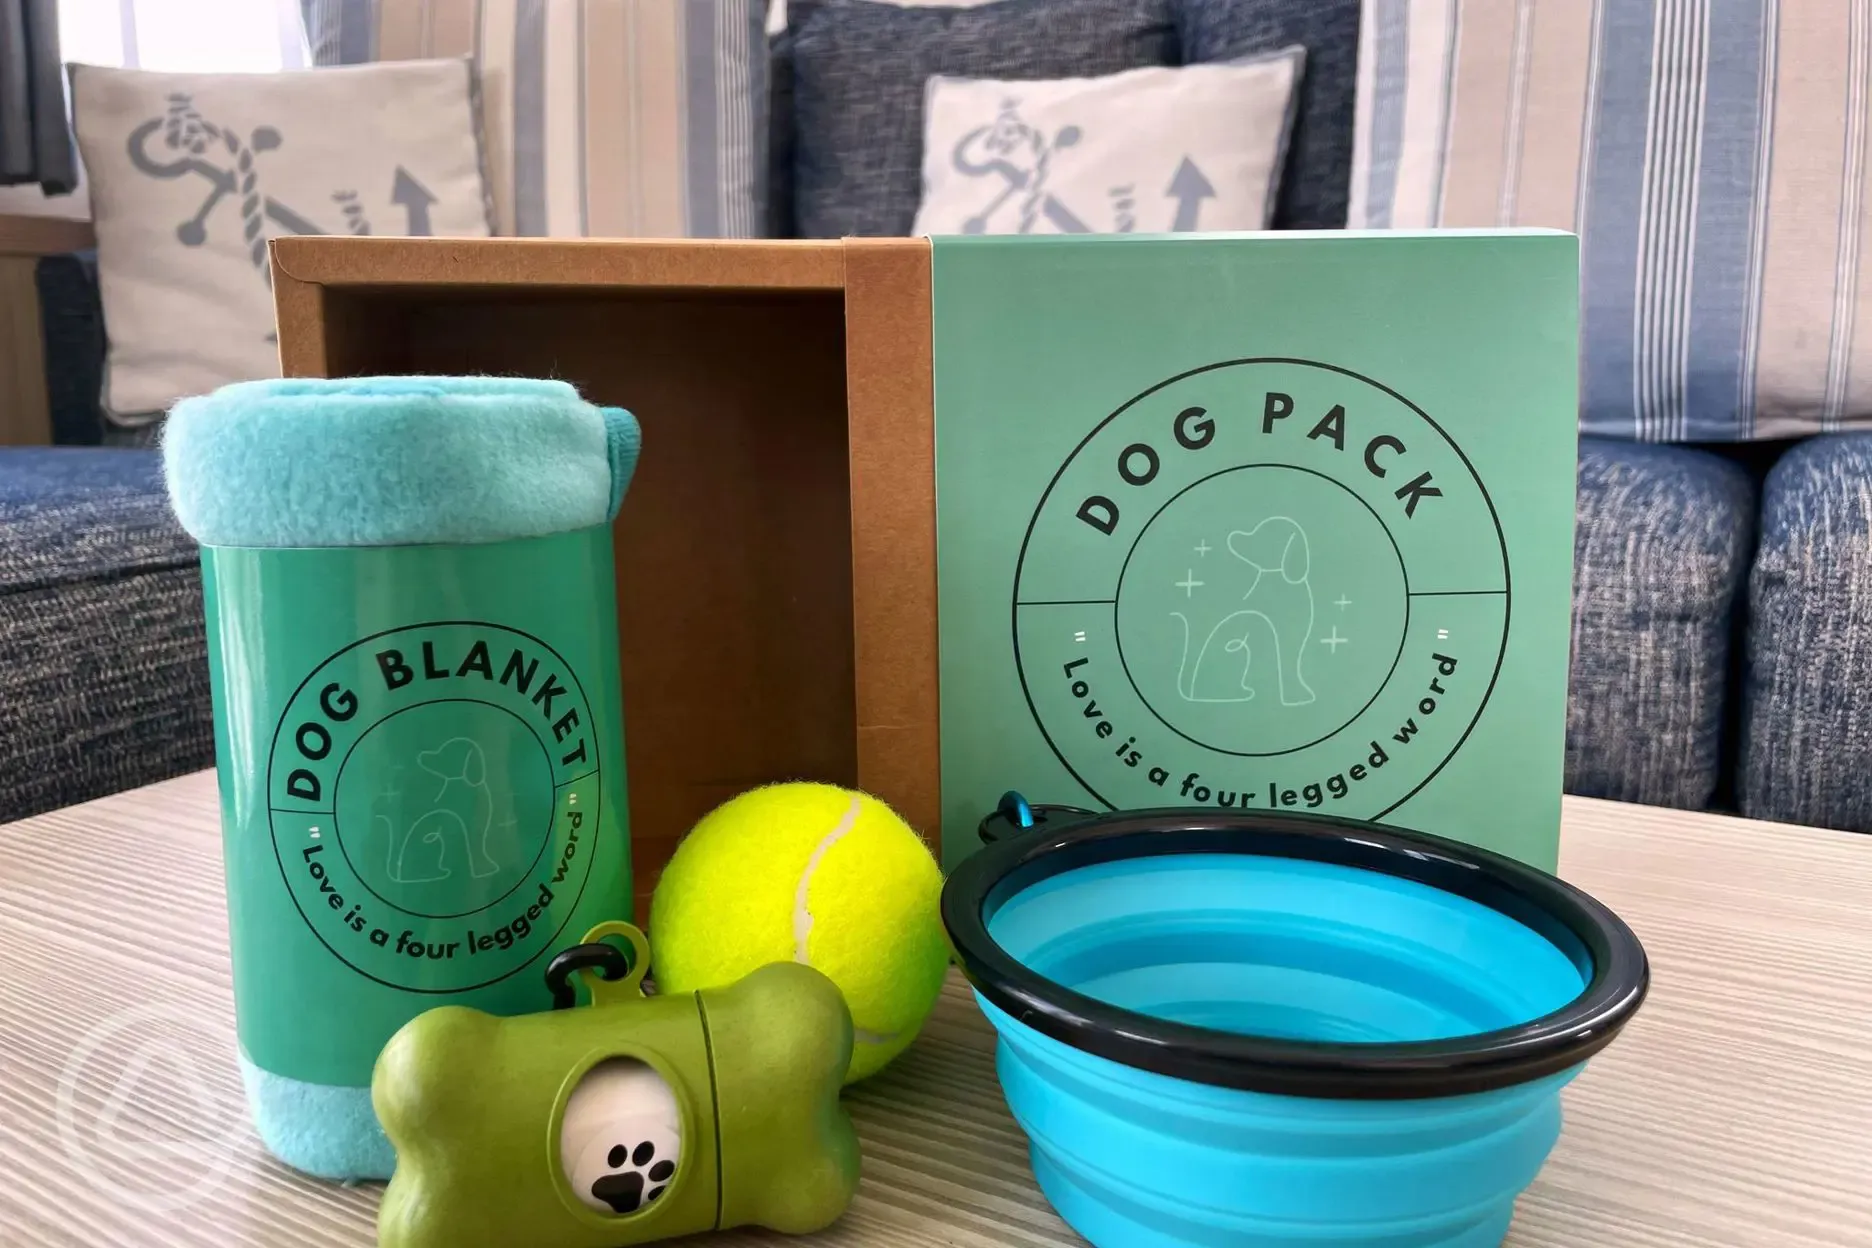 Doggy welcome pack